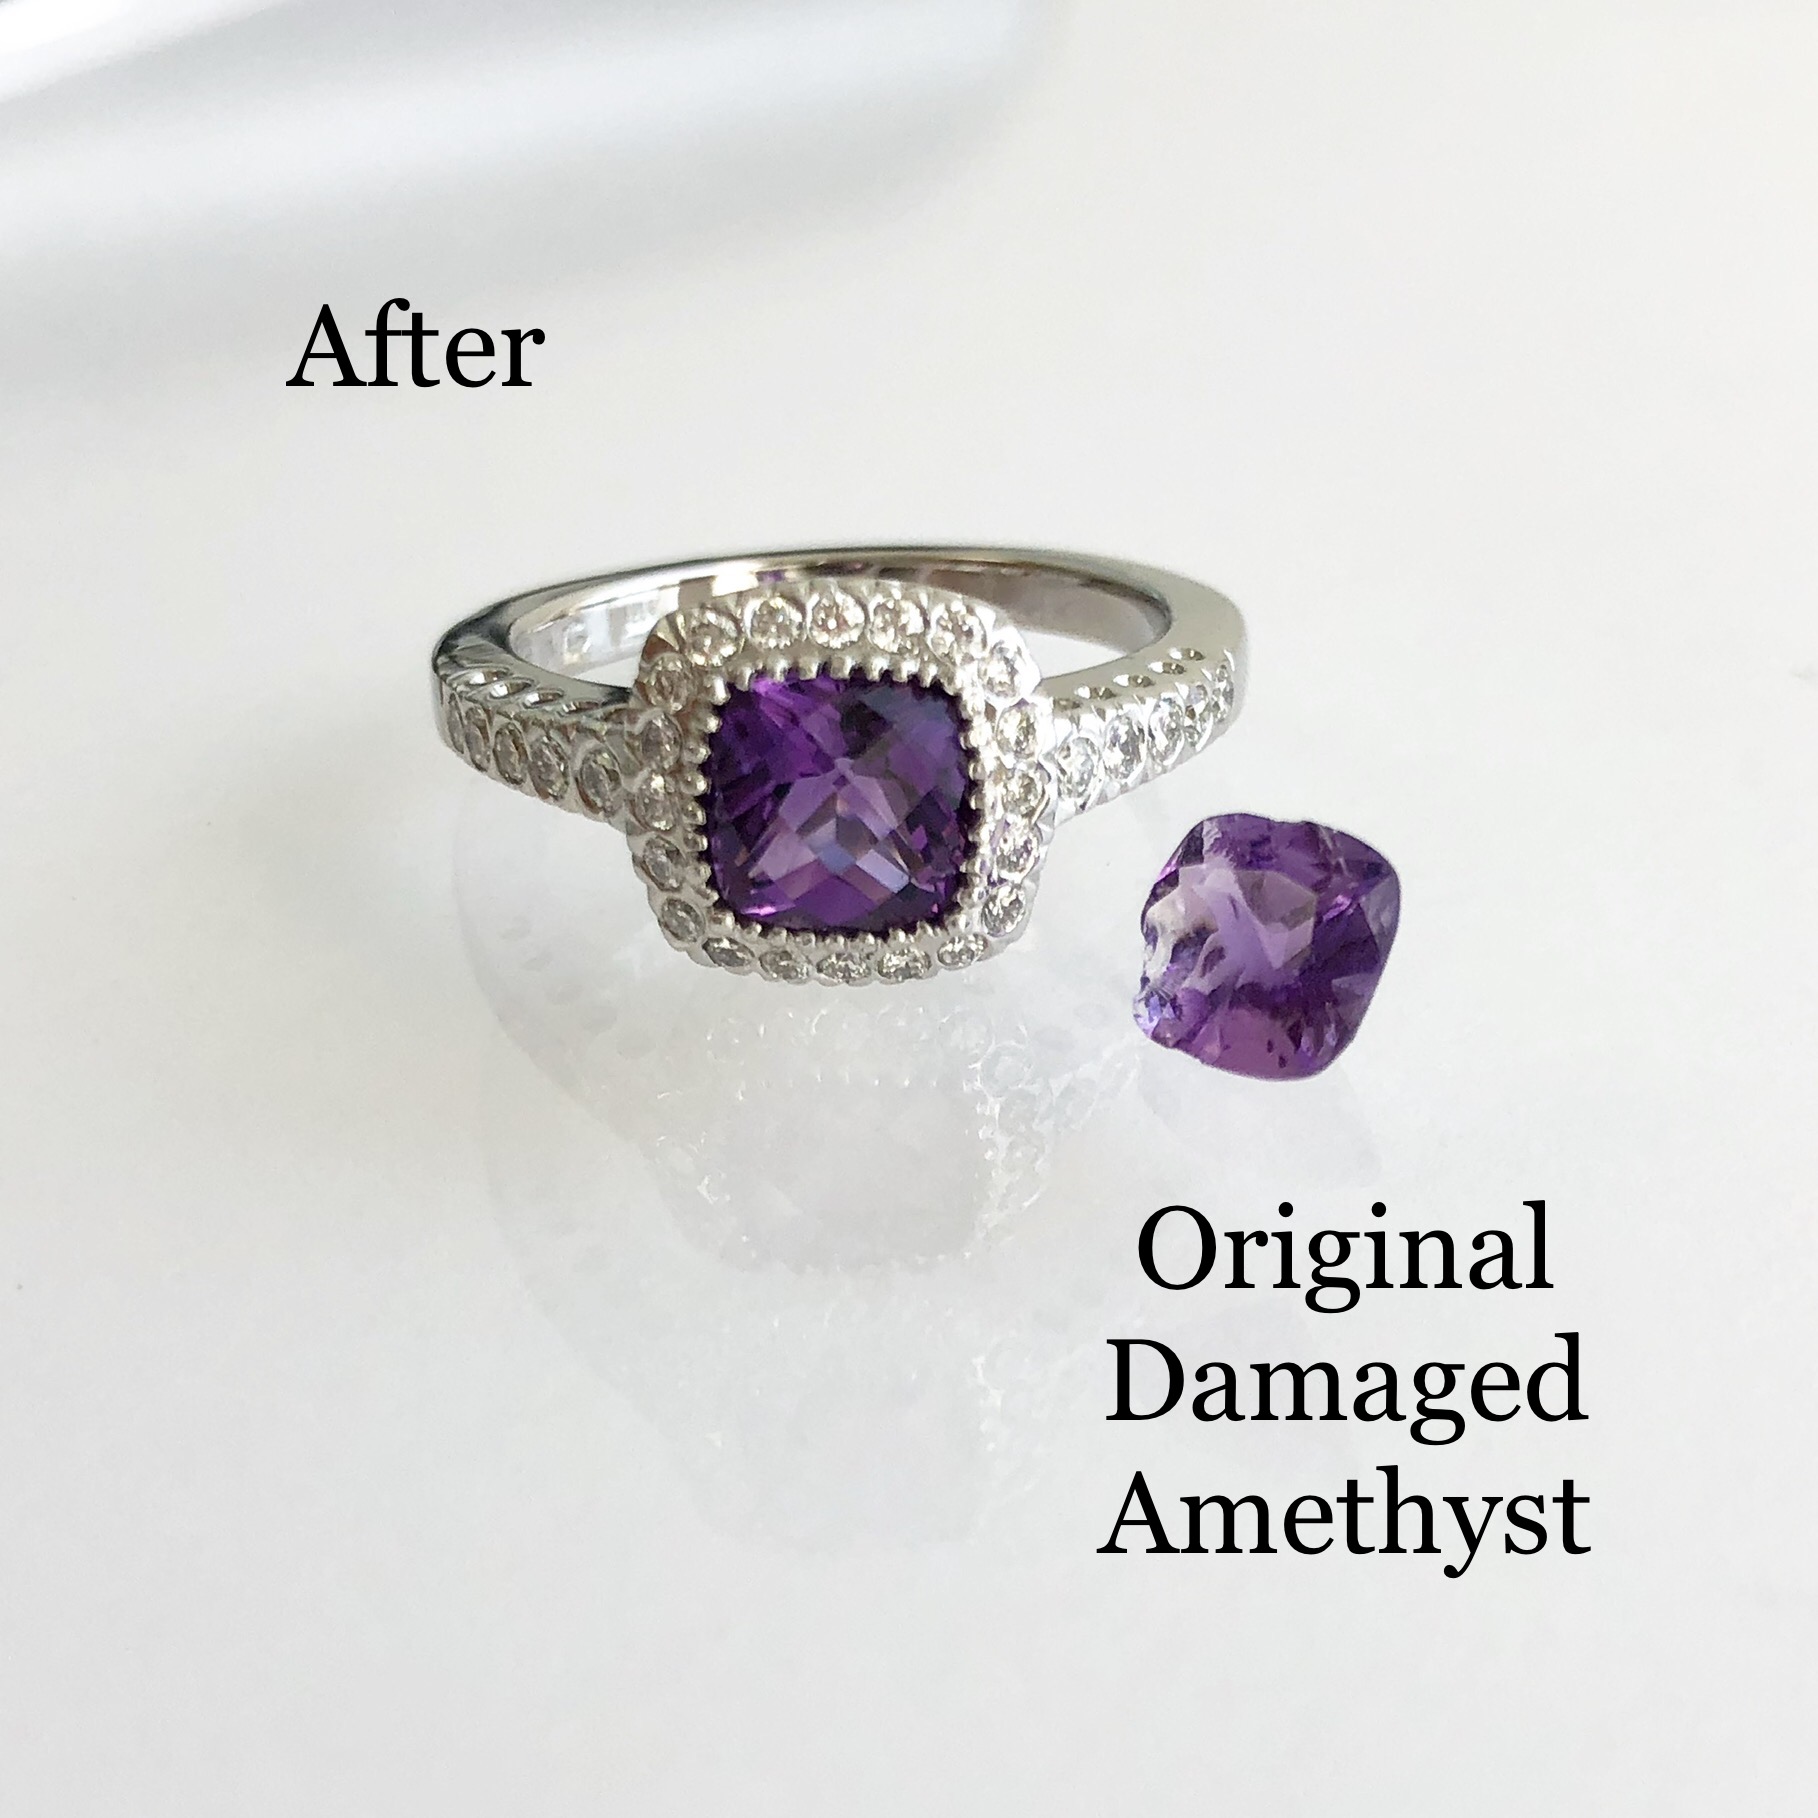 Chipped Amethyst Ring Replaced